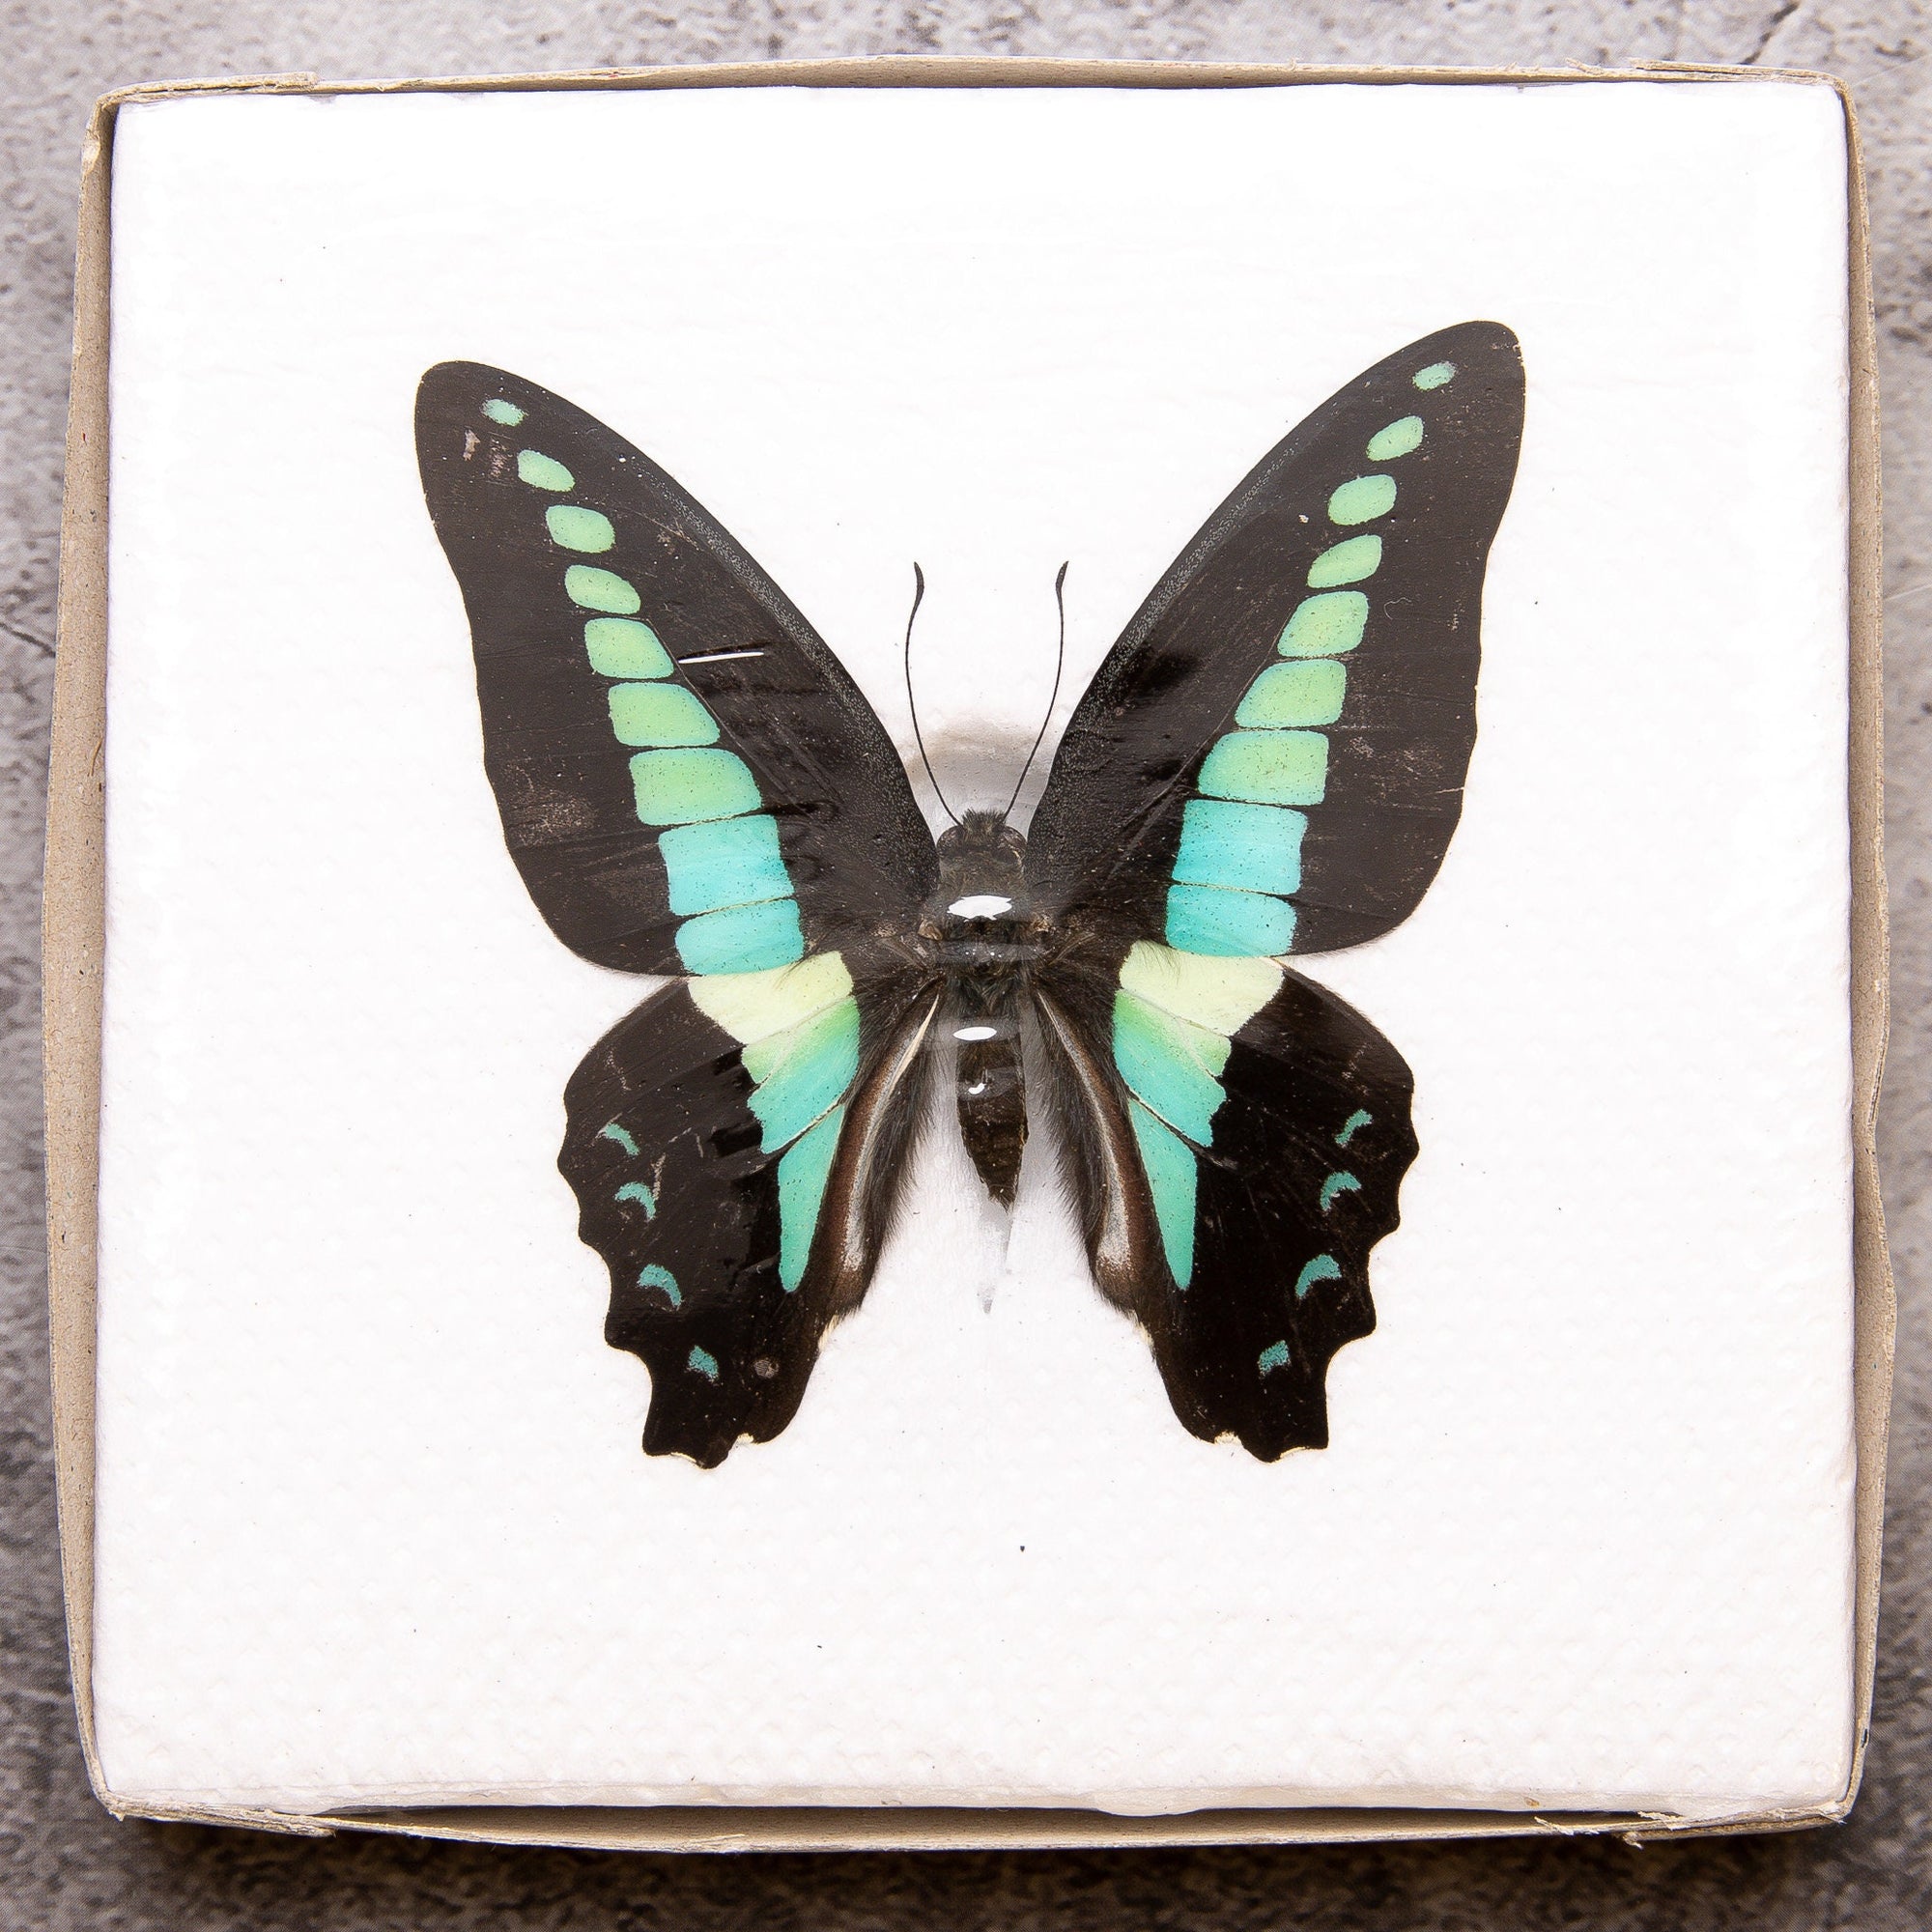 Pack of 2 Common Bluebottle Butterflies (Graphium sarpedon) WINGS-SPREAD, Ethically Sourced Preserved Specimens for Collecting & Artistic